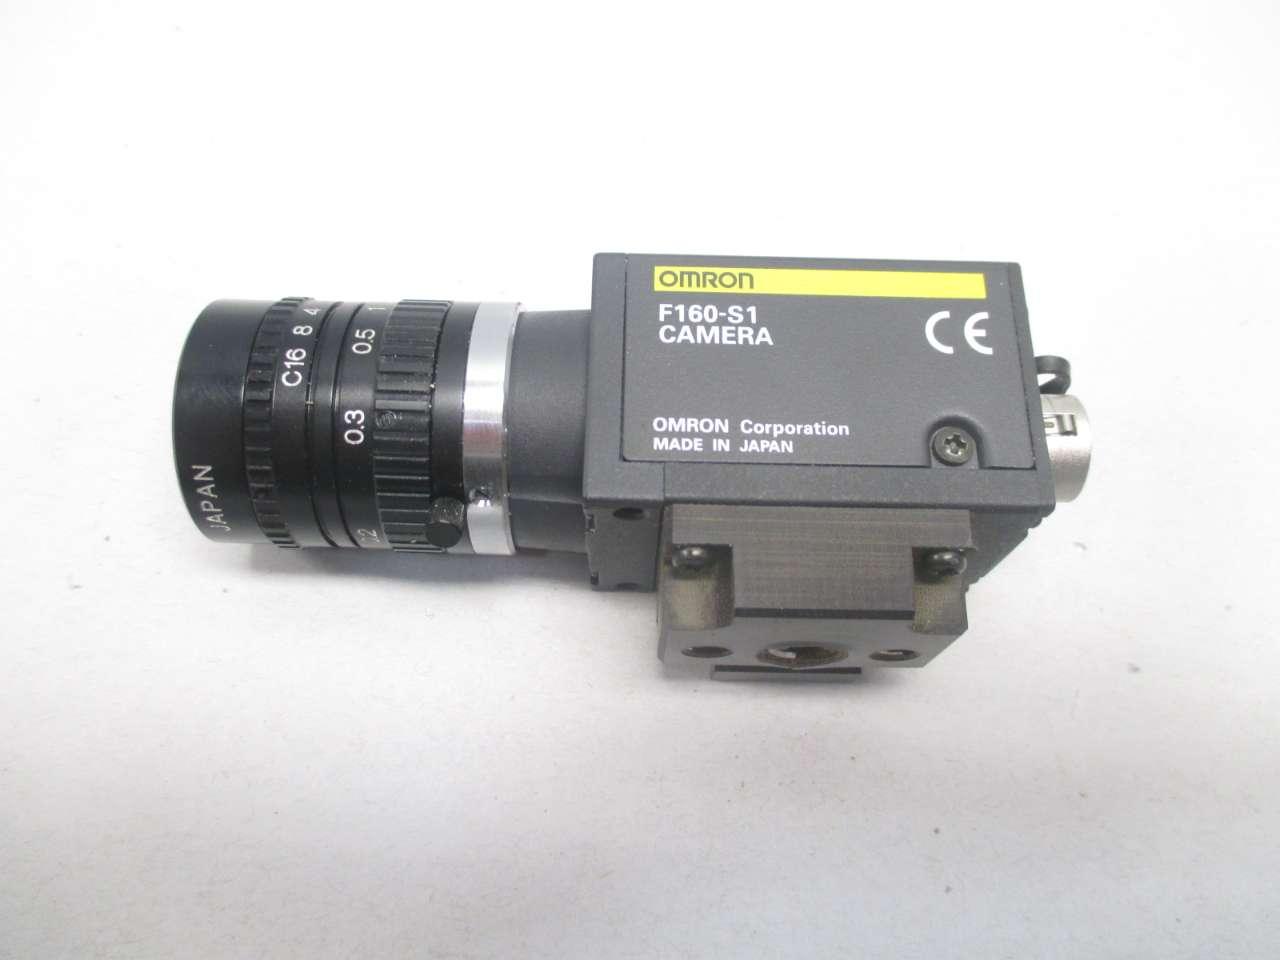 Details about   OMRON f160-s1 Vision Camera show original title 